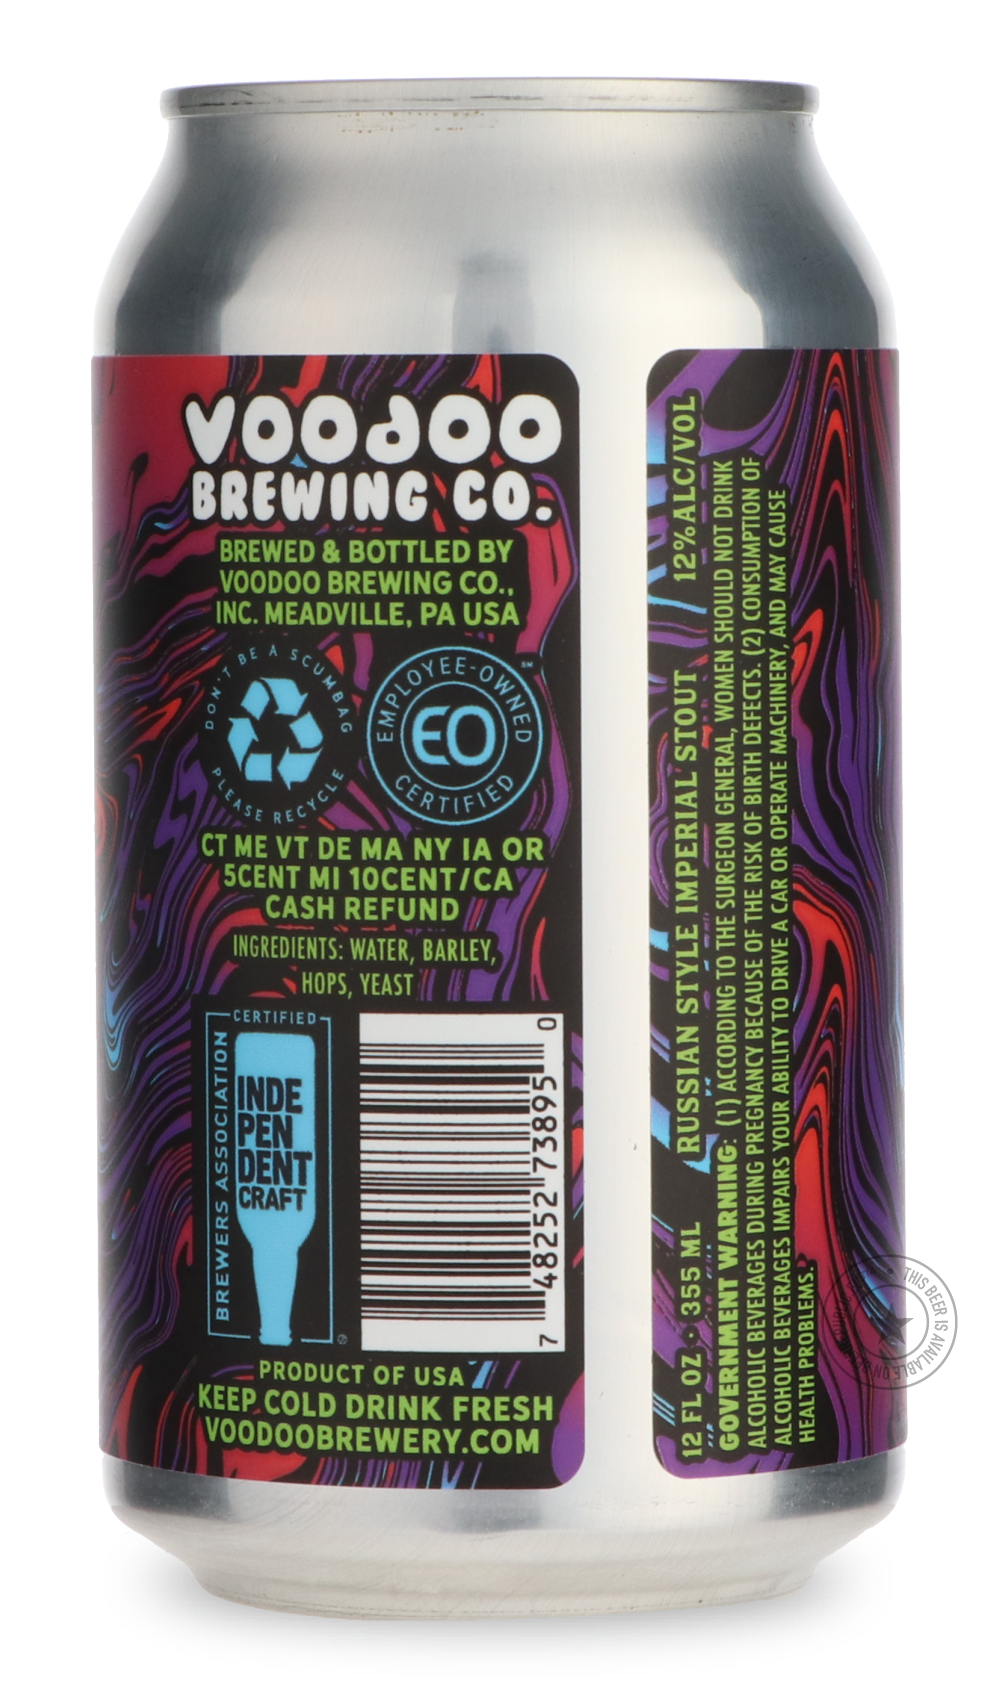 -Voodoo- Big Black Voodoo Daddy-Stout & Porter- Only @ Beer Republic - The best online beer store for American & Canadian craft beer - Buy beer online from the USA and Canada - Bier online kopen - Amerikaans bier kopen - Craft beer store - Craft beer kopen - Amerikanisch bier kaufen - Bier online kaufen - Acheter biere online - IPA - Stout - Porter - New England IPA - Hazy IPA - Imperial Stout - Barrel Aged - Barrel Aged Imperial Stout - Brown - Dark beer - Blond - Blonde - Pilsner - Lager - Wheat - Weizen 